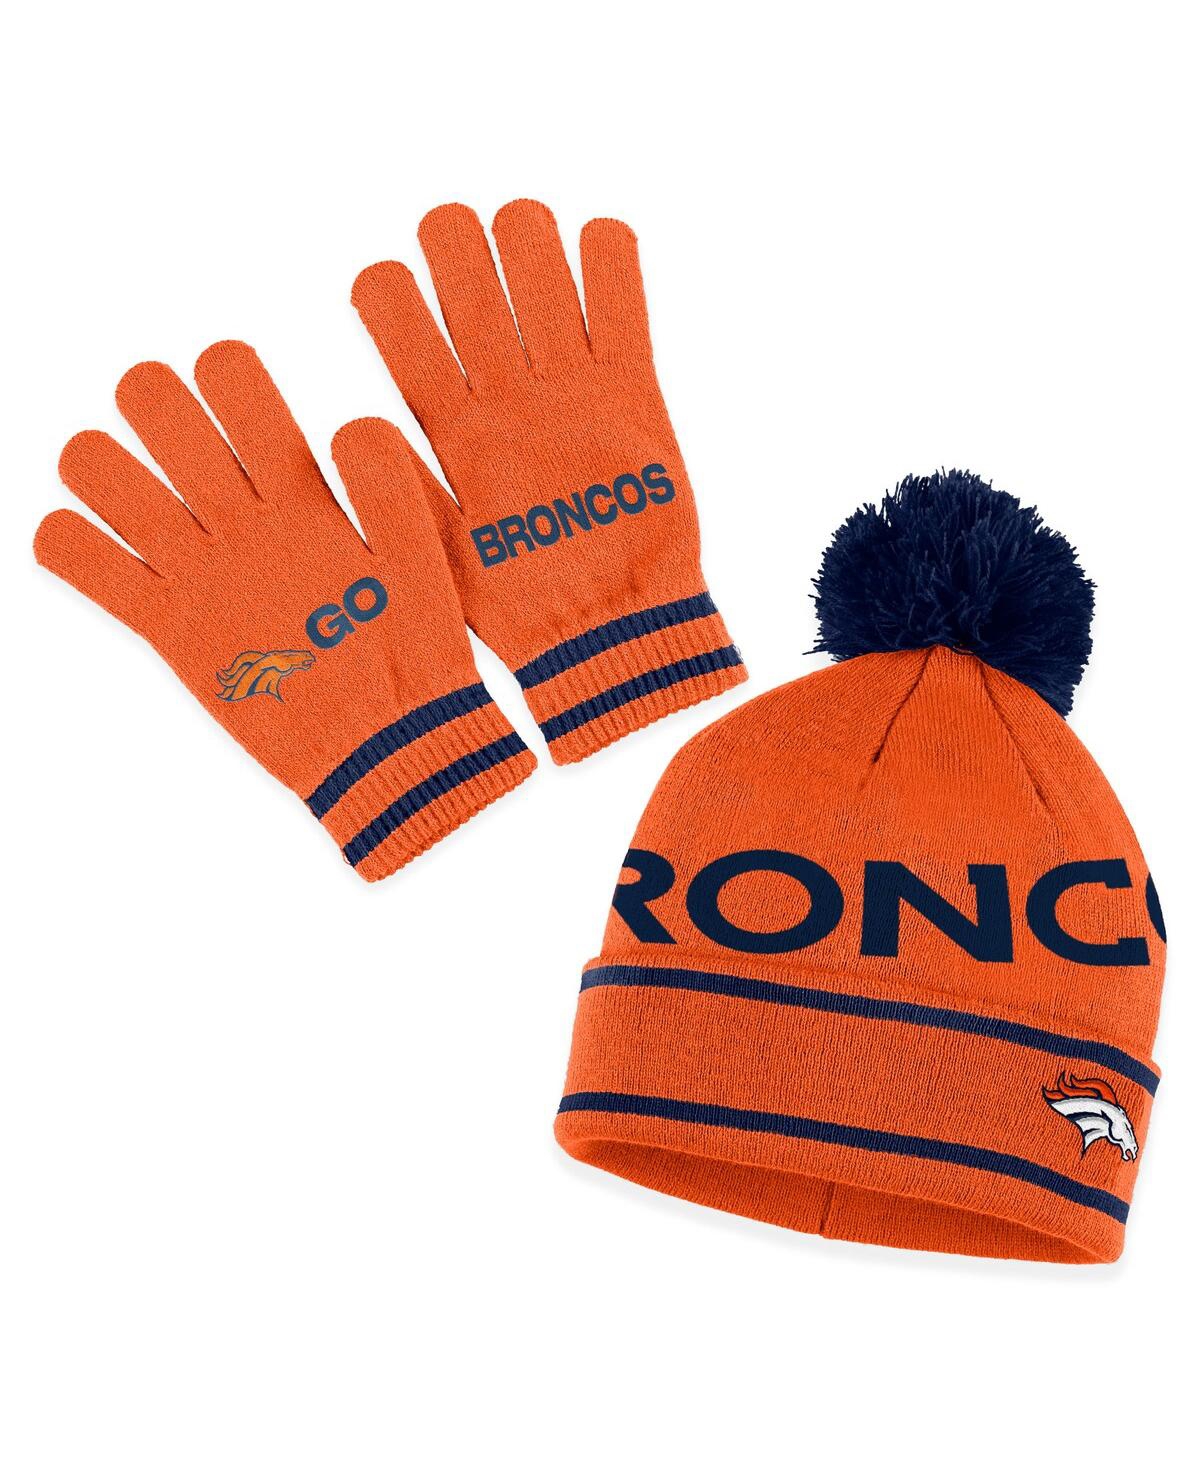 Women's Wear by Erin Andrews Orange Denver Broncos Double Jacquard Cuffed Knit Hat with Pom and Gloves Set - Orange